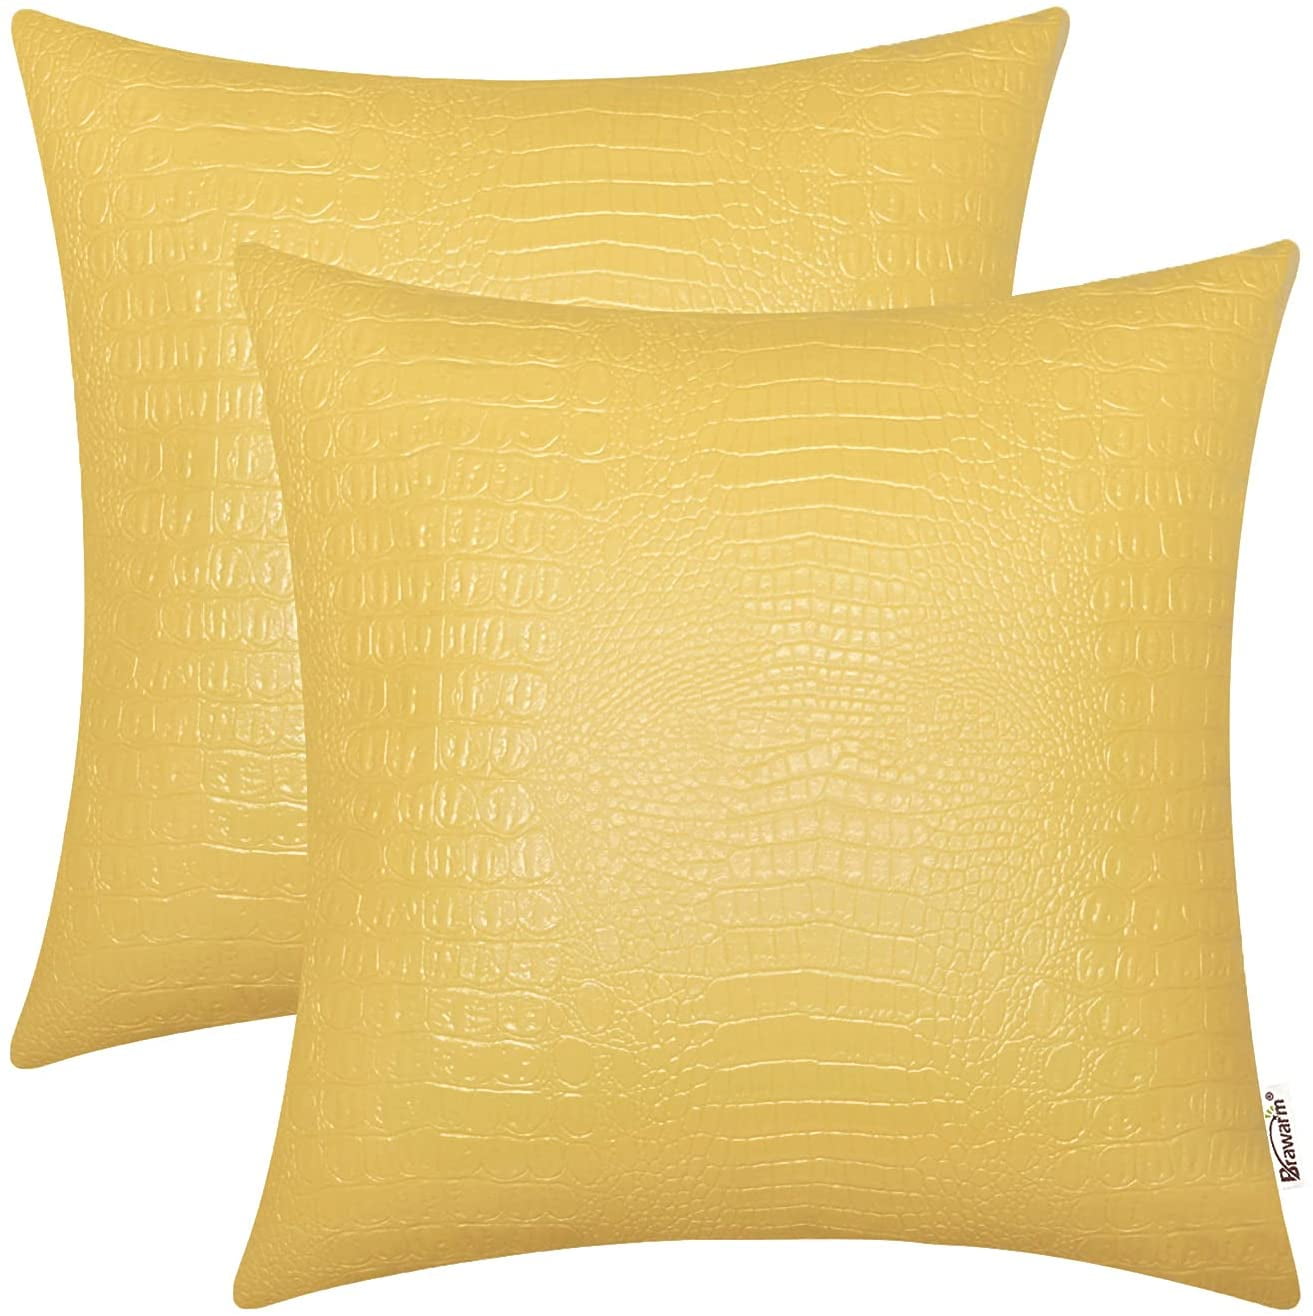 2Pcs Bright Yellow Bolster Covers Pillows Shells Dyed Soft Chenille Sofa 12x20" 